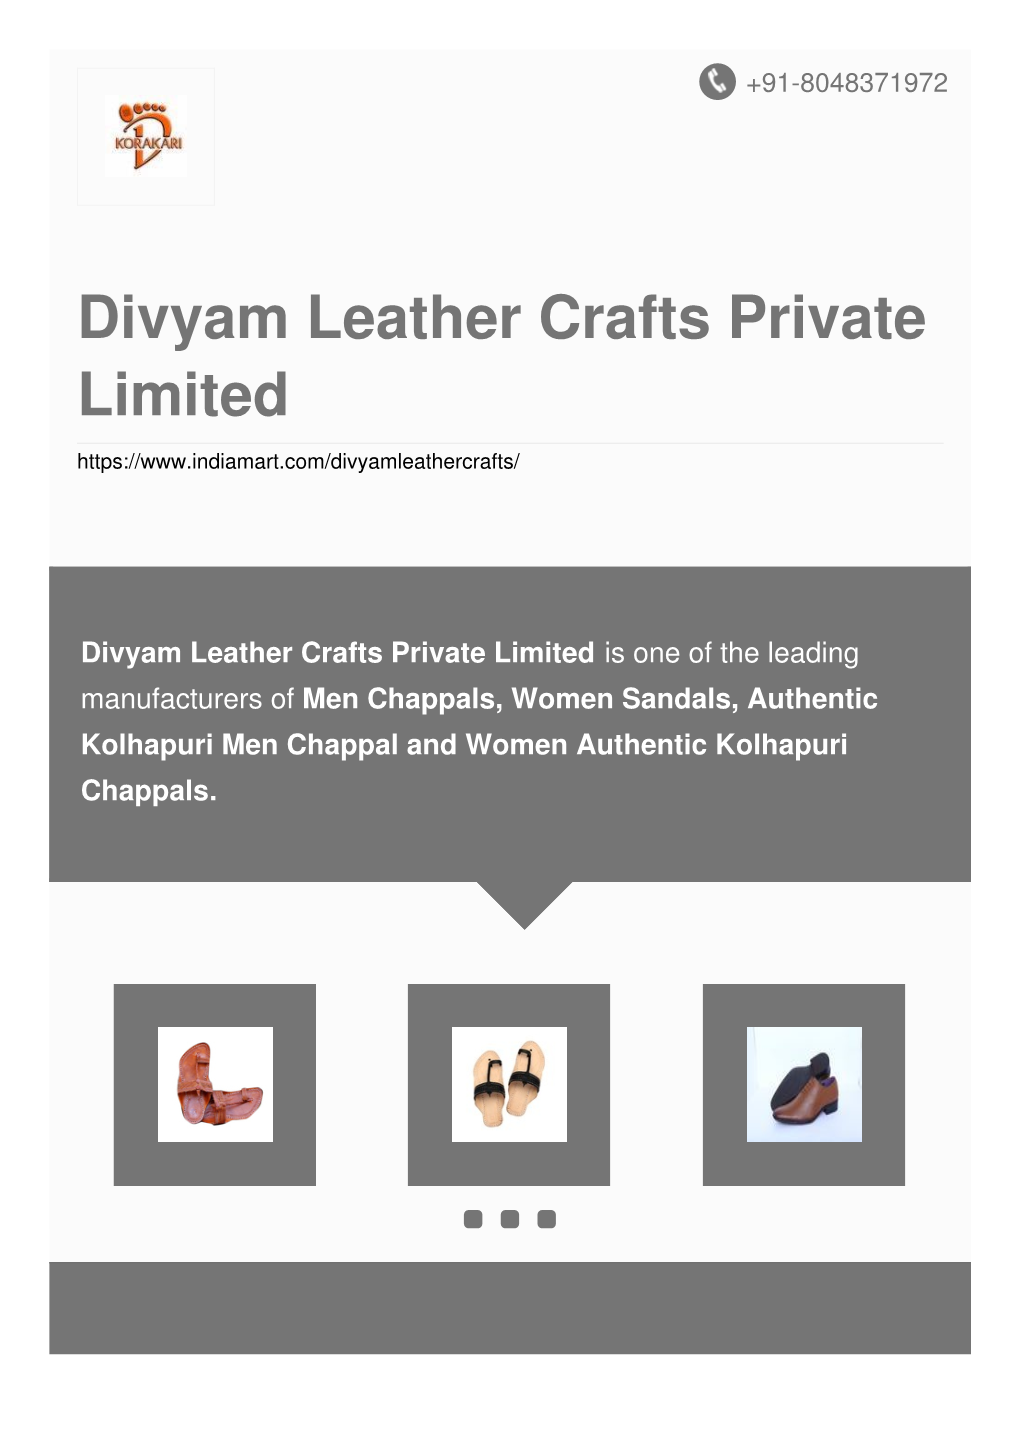 Divyam Leather Crafts Private Limited